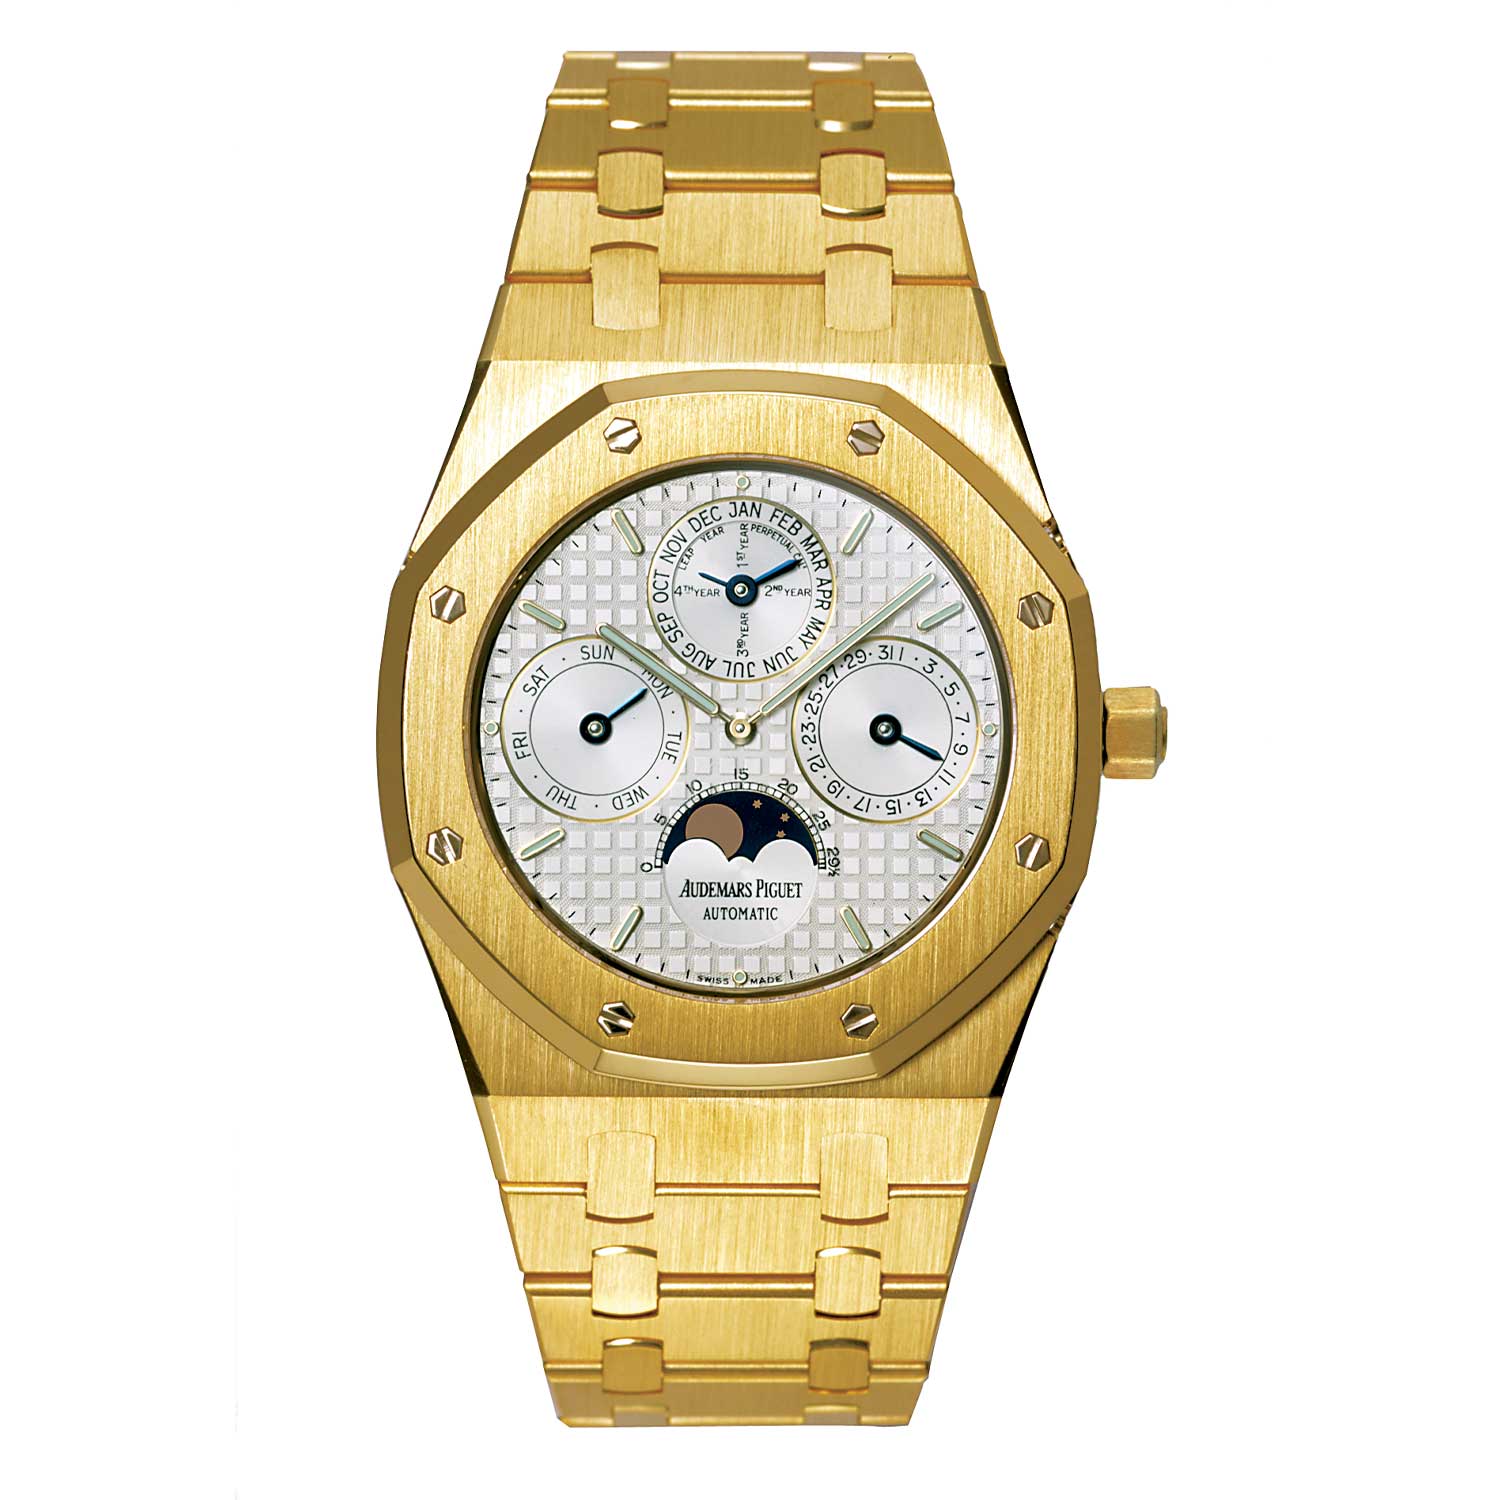 The Royal Oak Perpetual Calendar ref. 25820BA, in all yellow gold with a white tapisserie dial